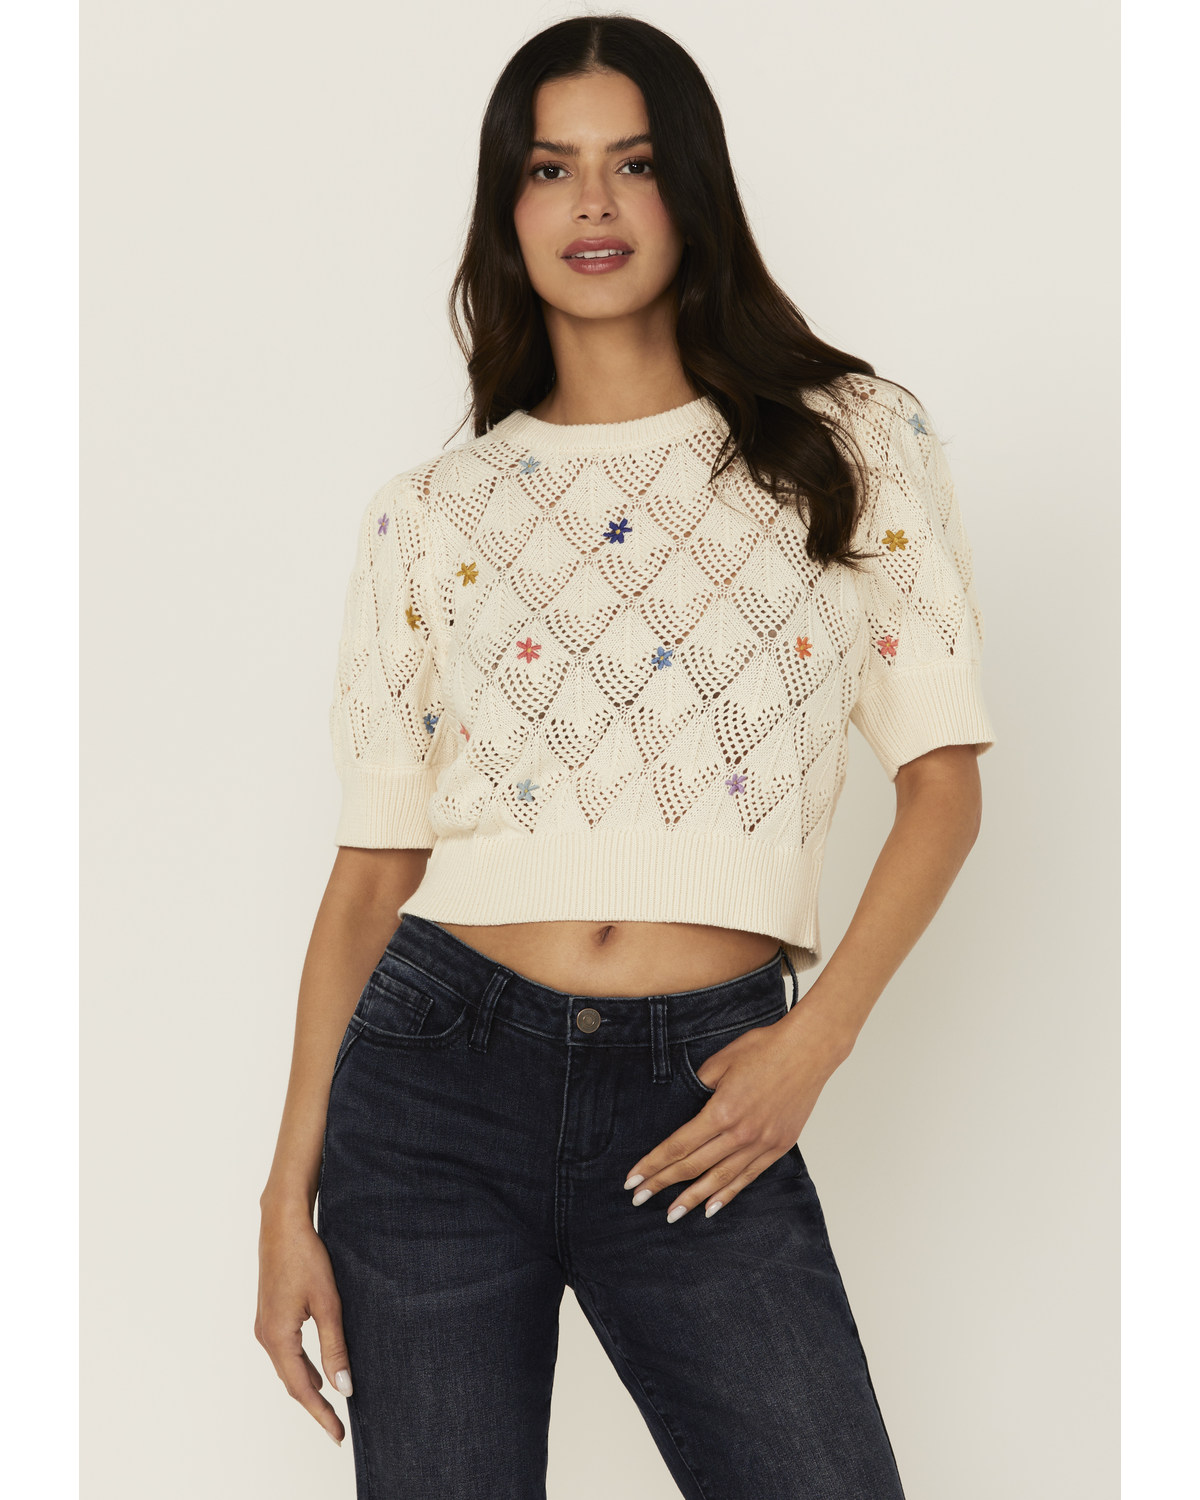 Driftwood Women's Floral Embroidered Knit Top